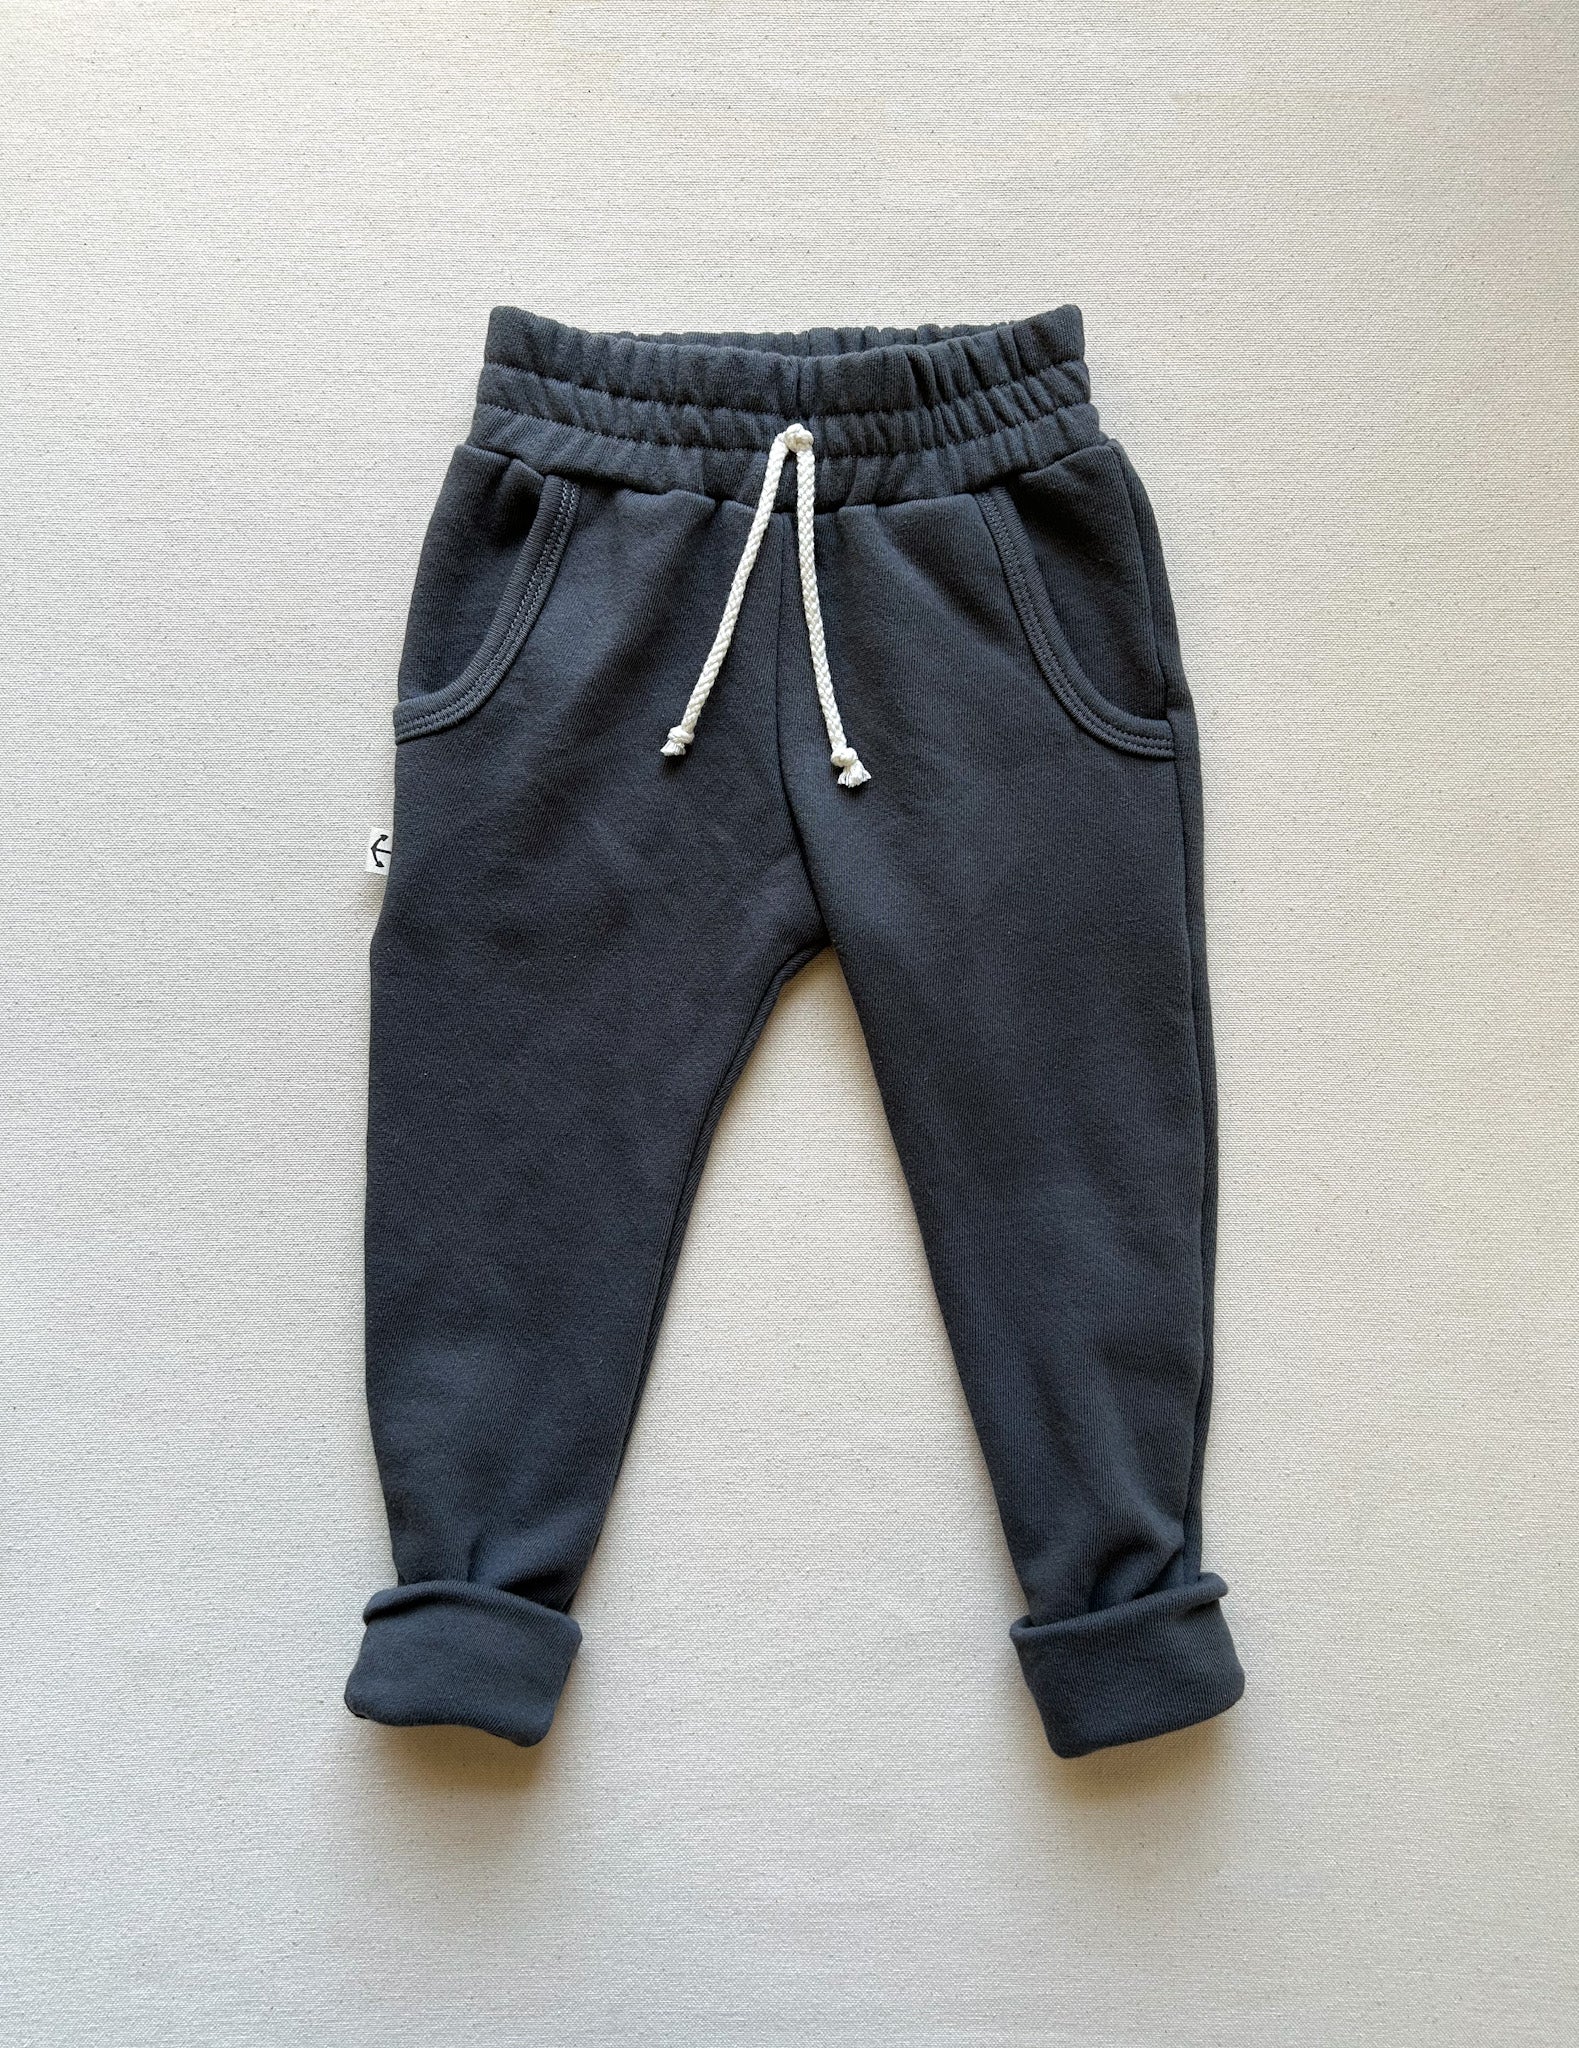 JOGGERS – Coco Knot Clothing